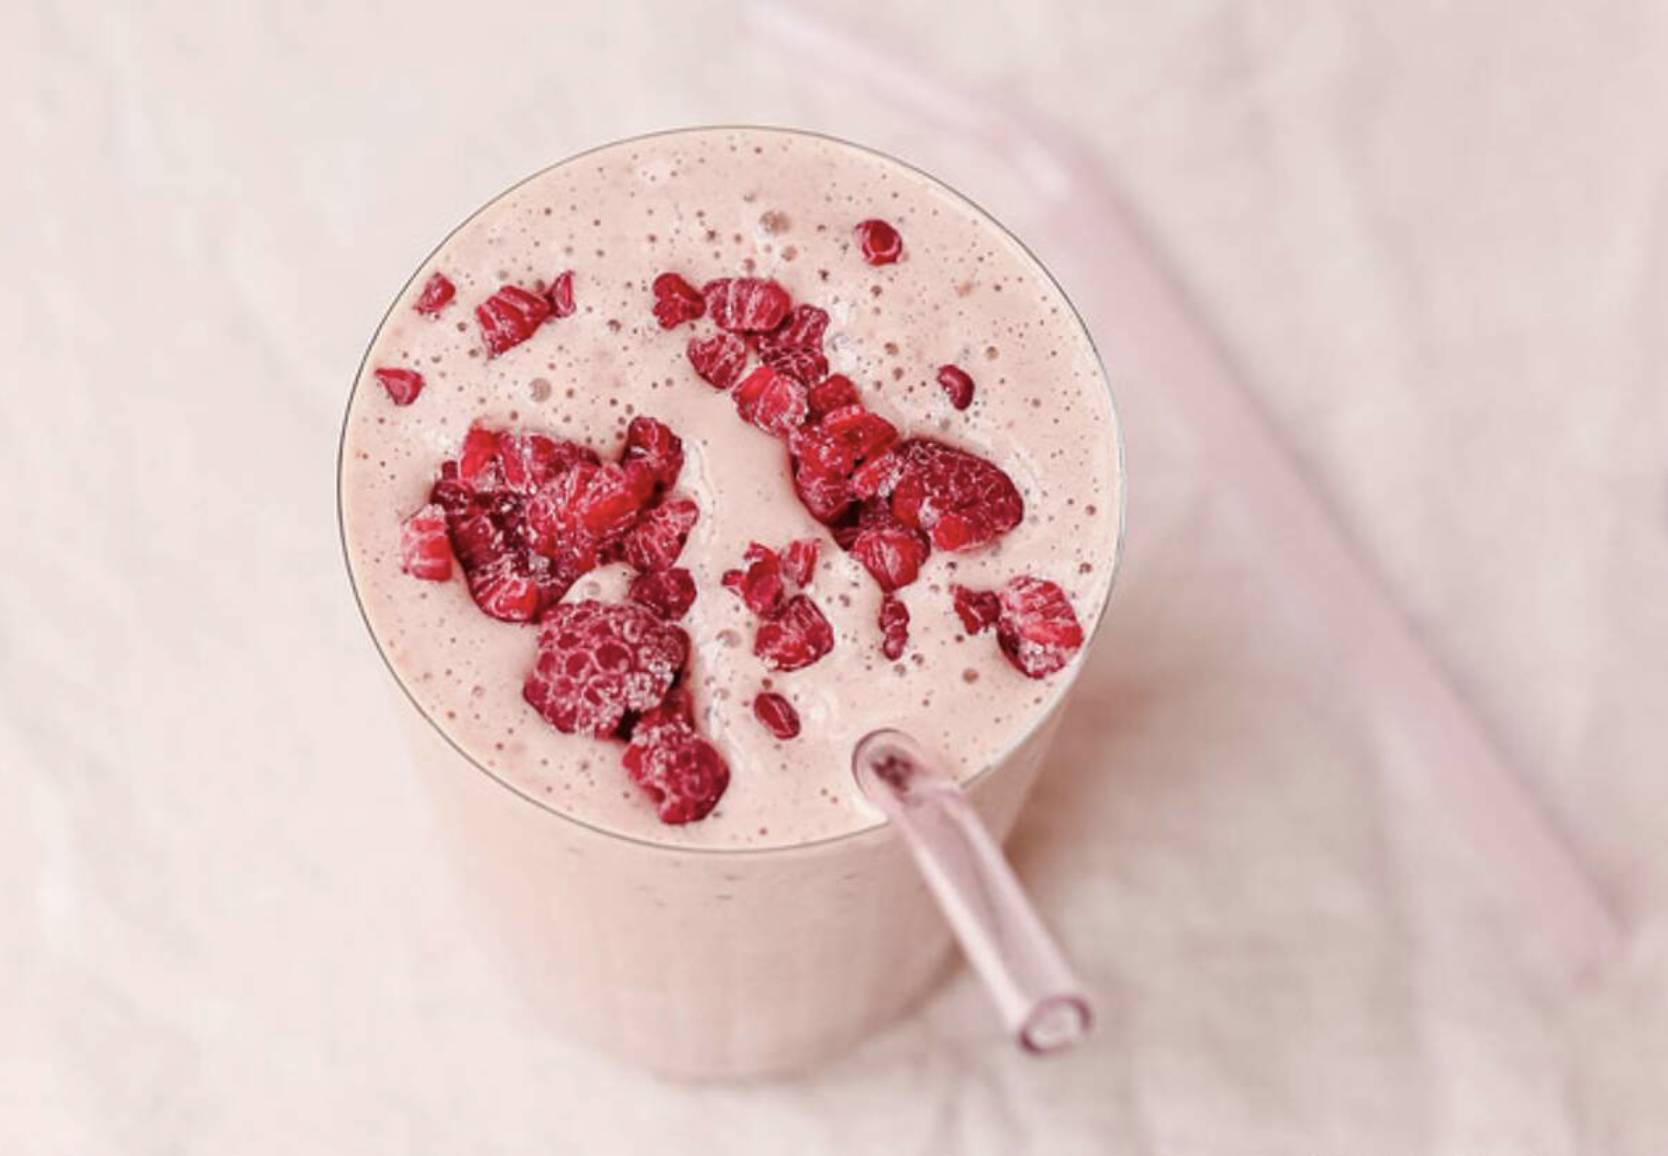 40+ Best Low-Carb Smoothies and Shakes